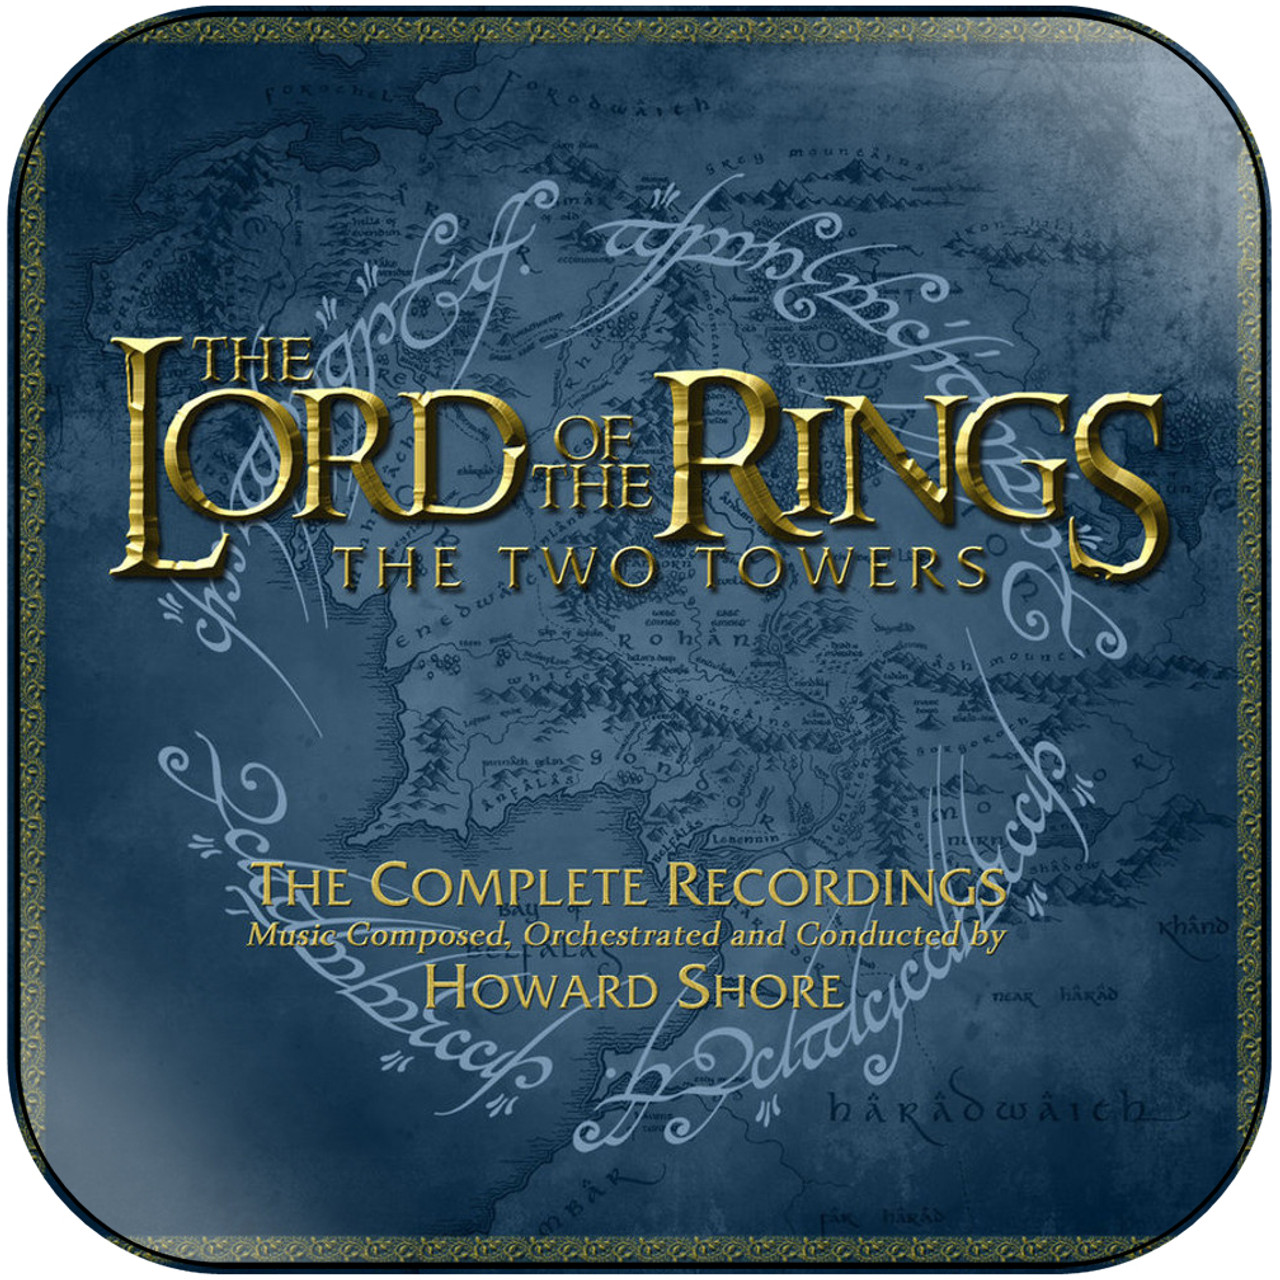 The Lord of the Rings: The Two Towers, Board Game